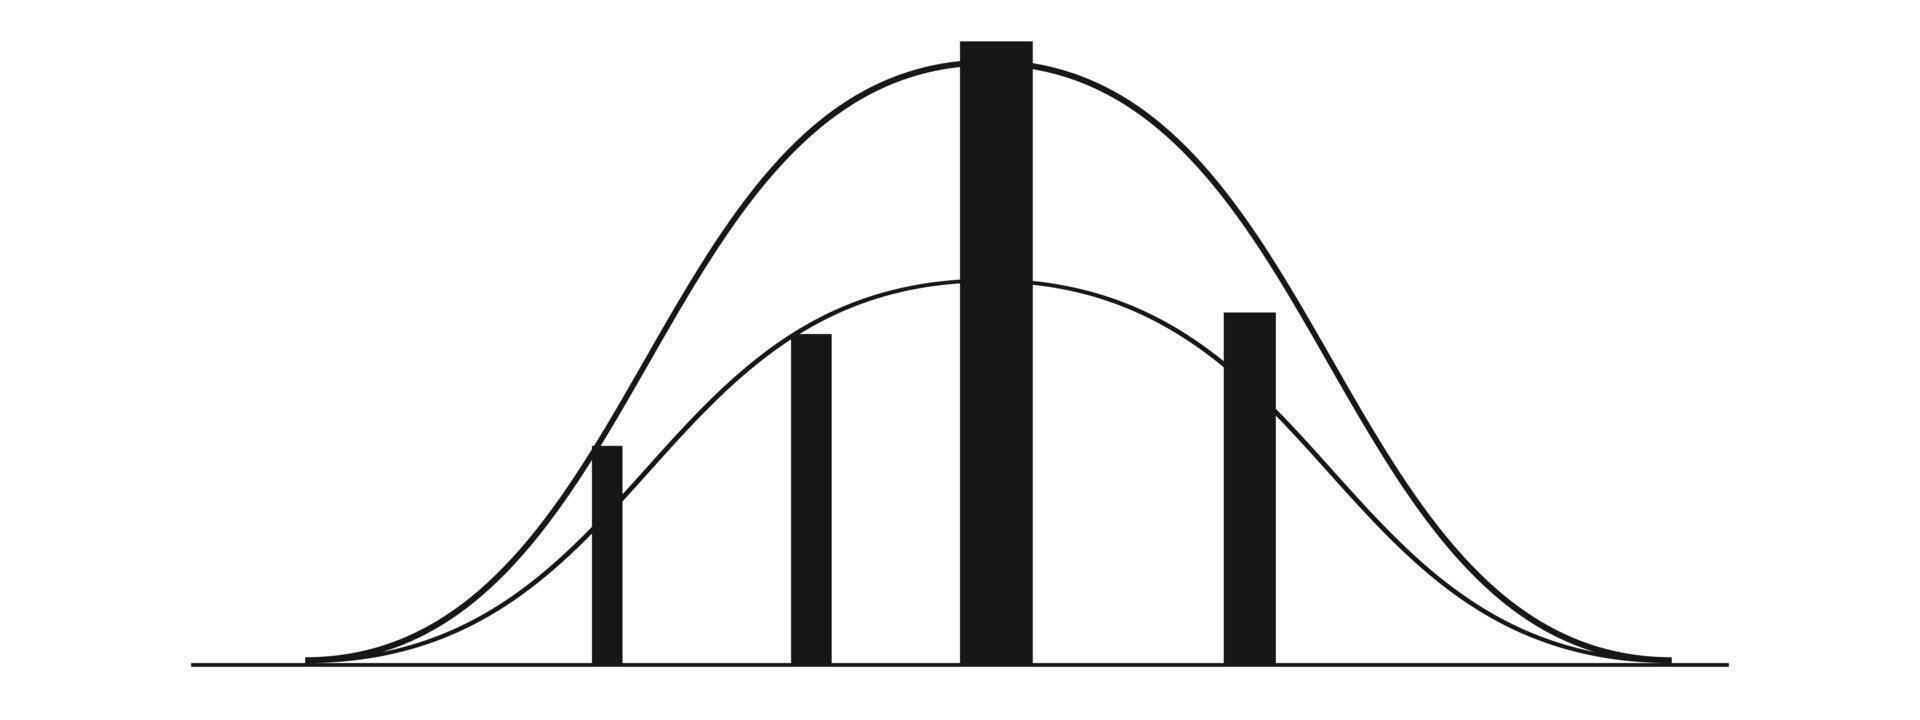 Bell curve template with 4 columns. Gaussian or normal distribution graph. Probability theory concept. Layout for statistics or logistic data isolated on white background vector